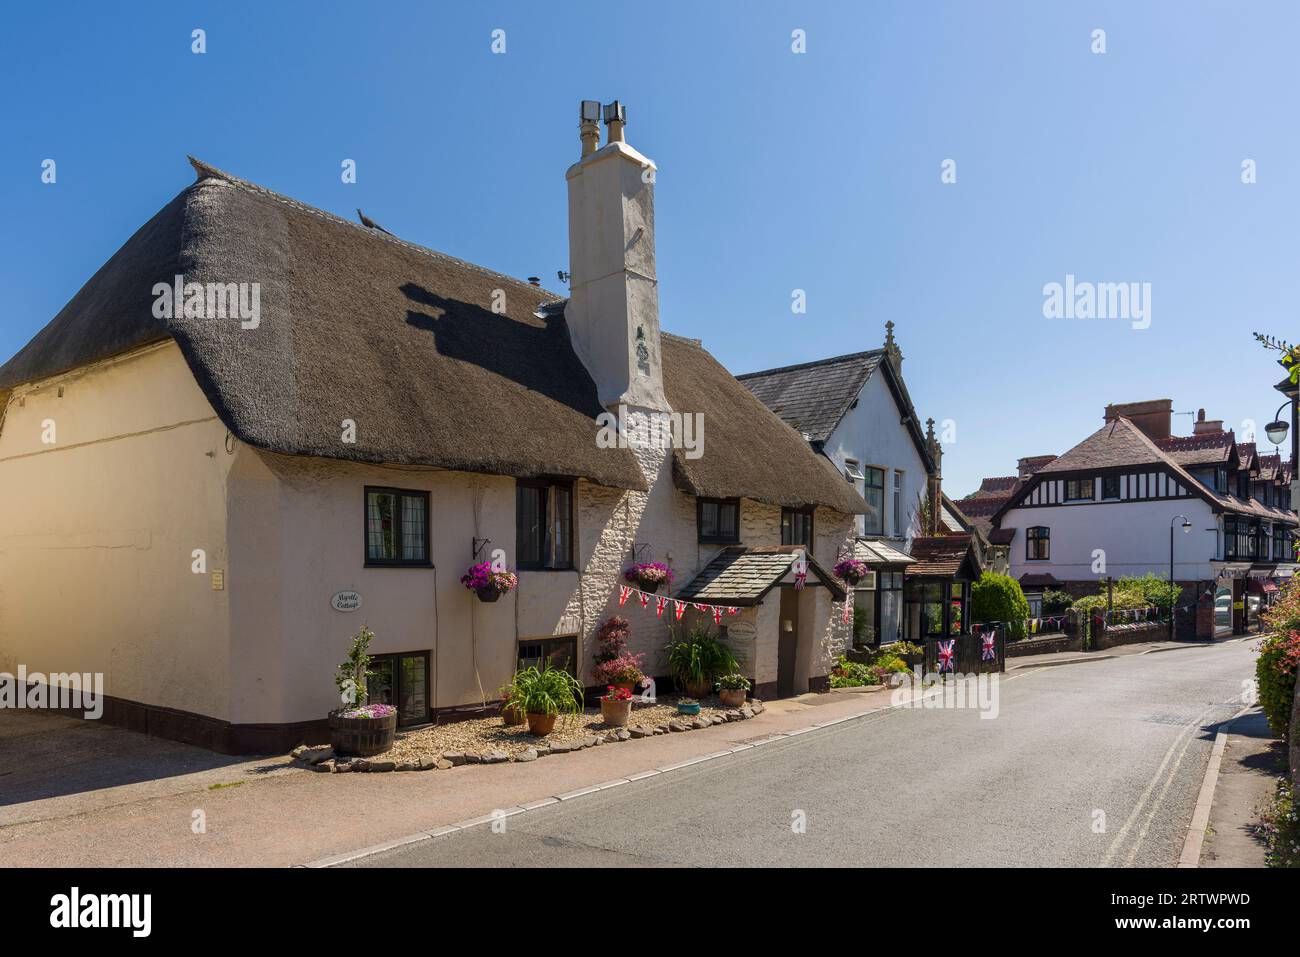 A thatched cottage on the High Street in the village of Porlock, Exmoor National Park, Somerset, England. Stock Photo